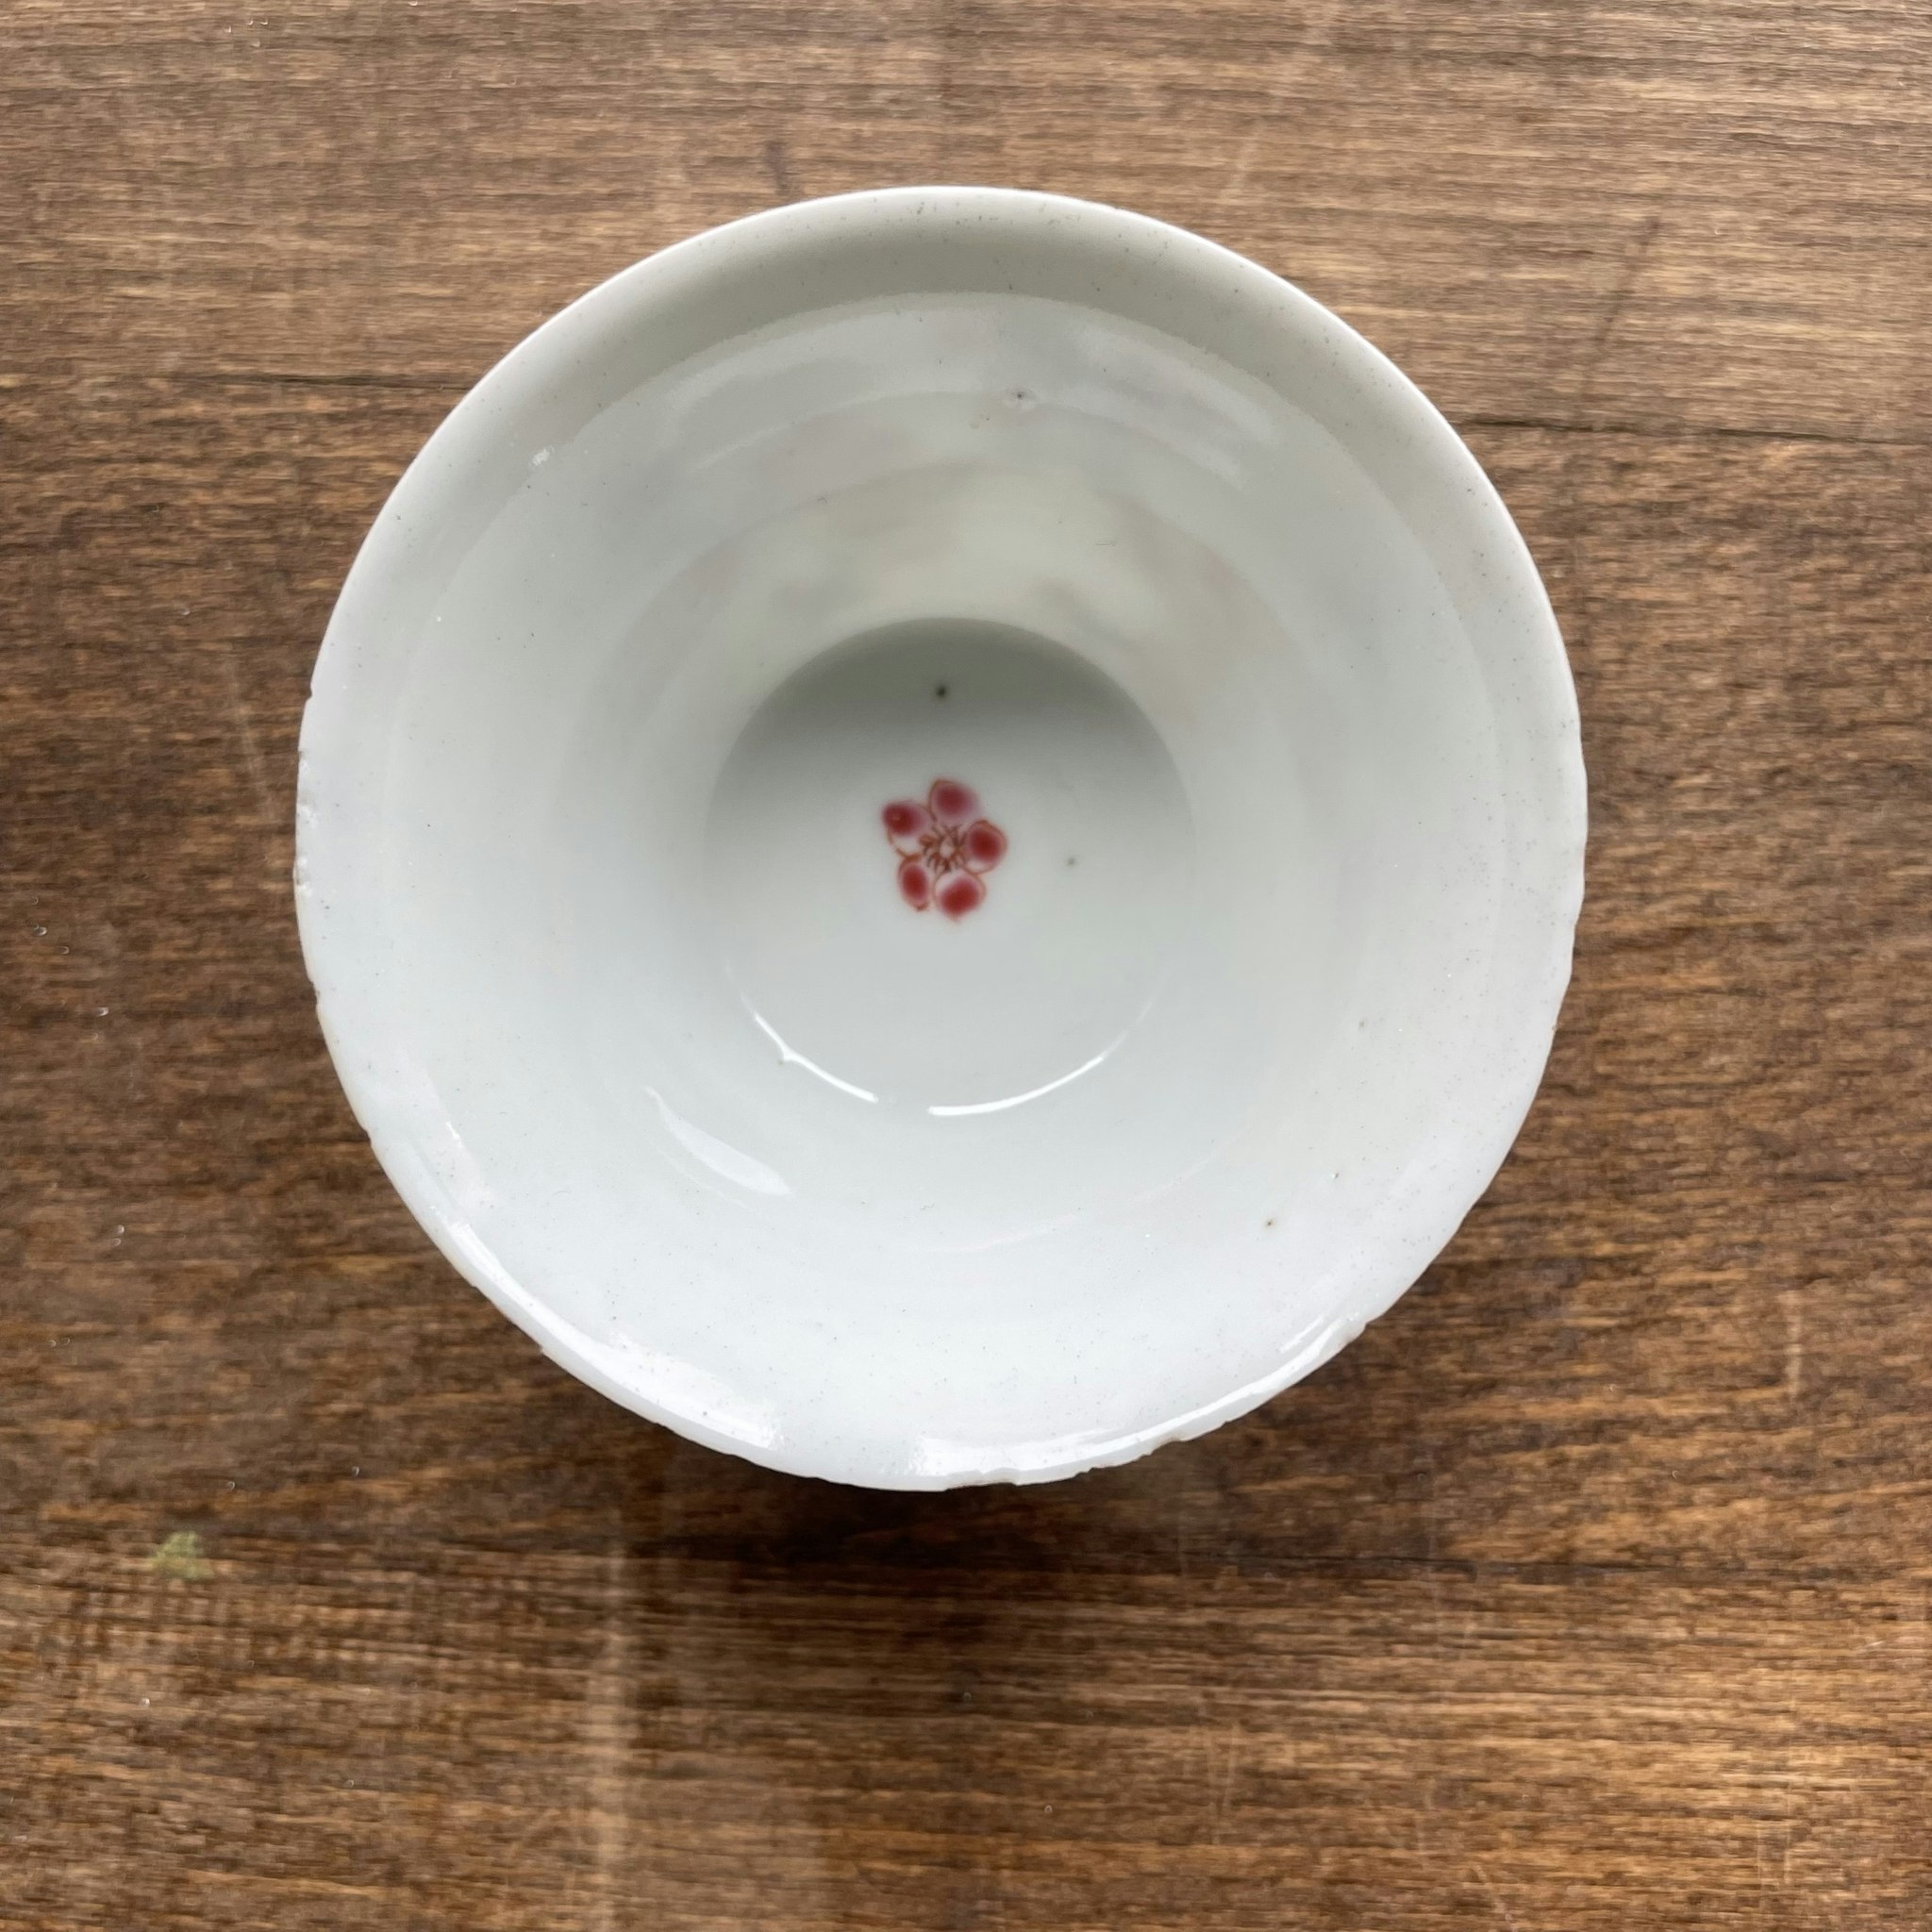 Antique Chinese Porcelain teacup and saucer Yongzheng Period 18th c #729